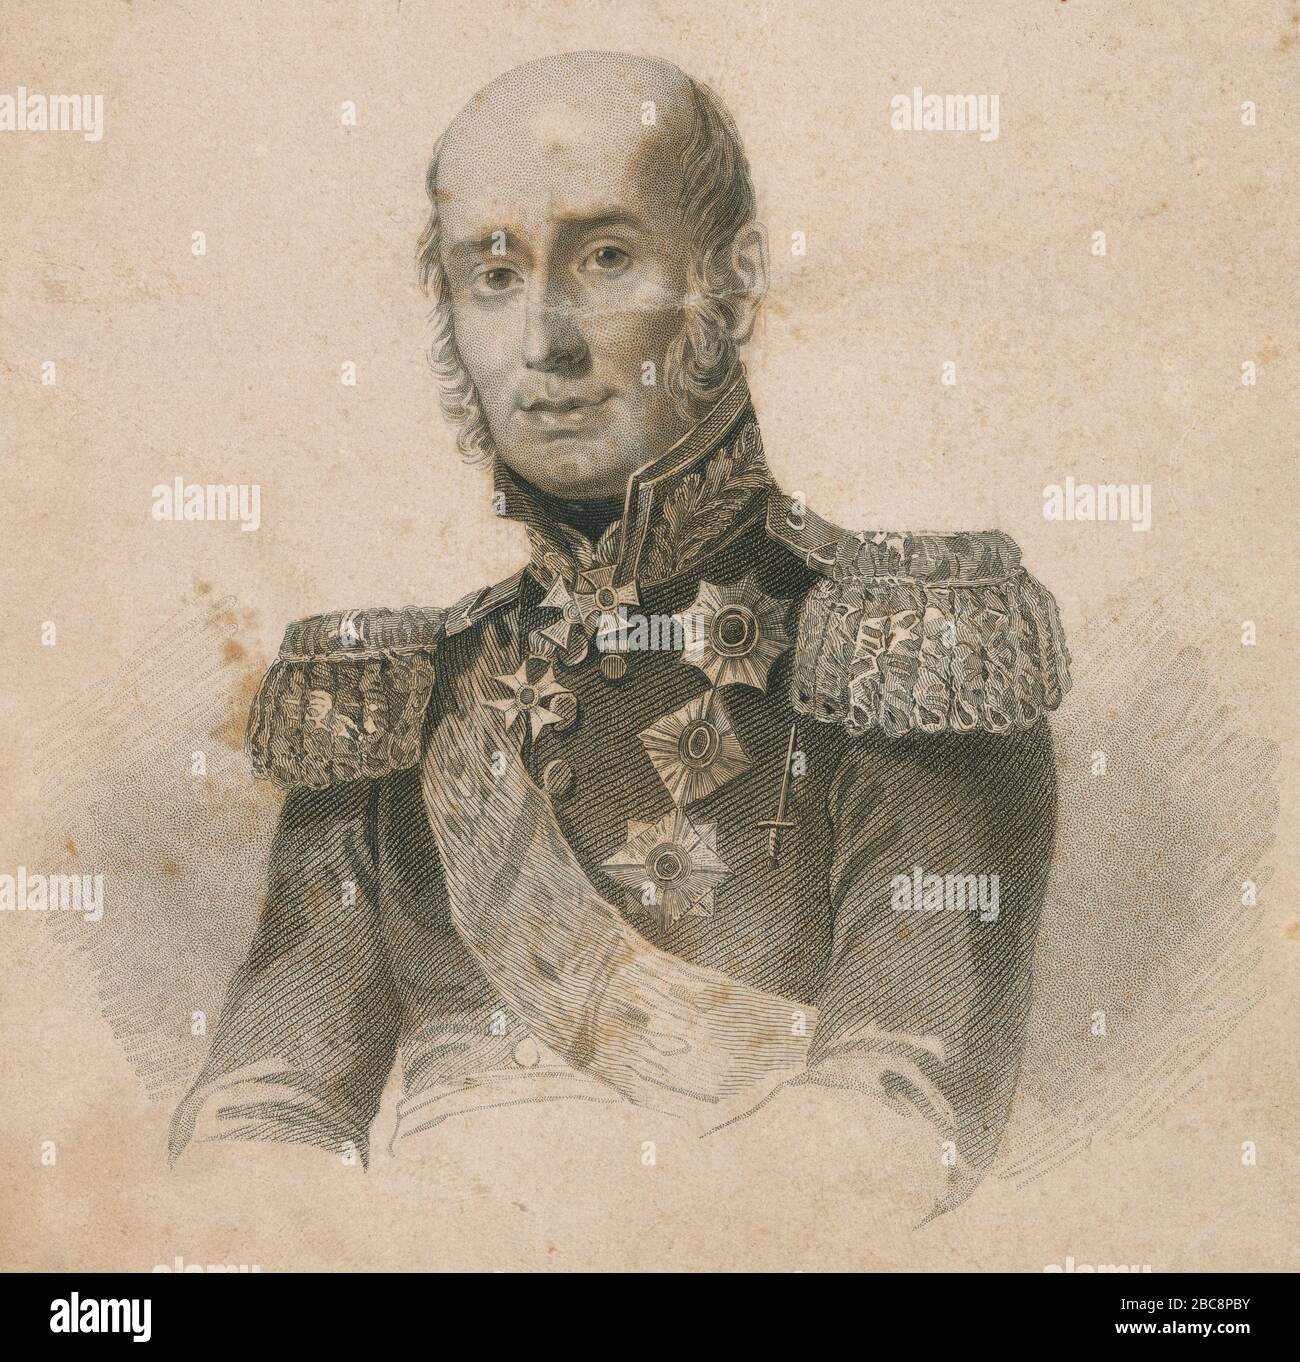 Antique engraving, Michael Andreas Barclay de Tolly. Prince Michael Andreas Barclay de Tolly (1761-1818) was a Baltic German field marshal and Minister of War of the Russian Empire during Napoleon's invasion in 1812 and the War of the Sixth Coalition. SOURCE: ORIGINAL ENGRAVING Stock Photo